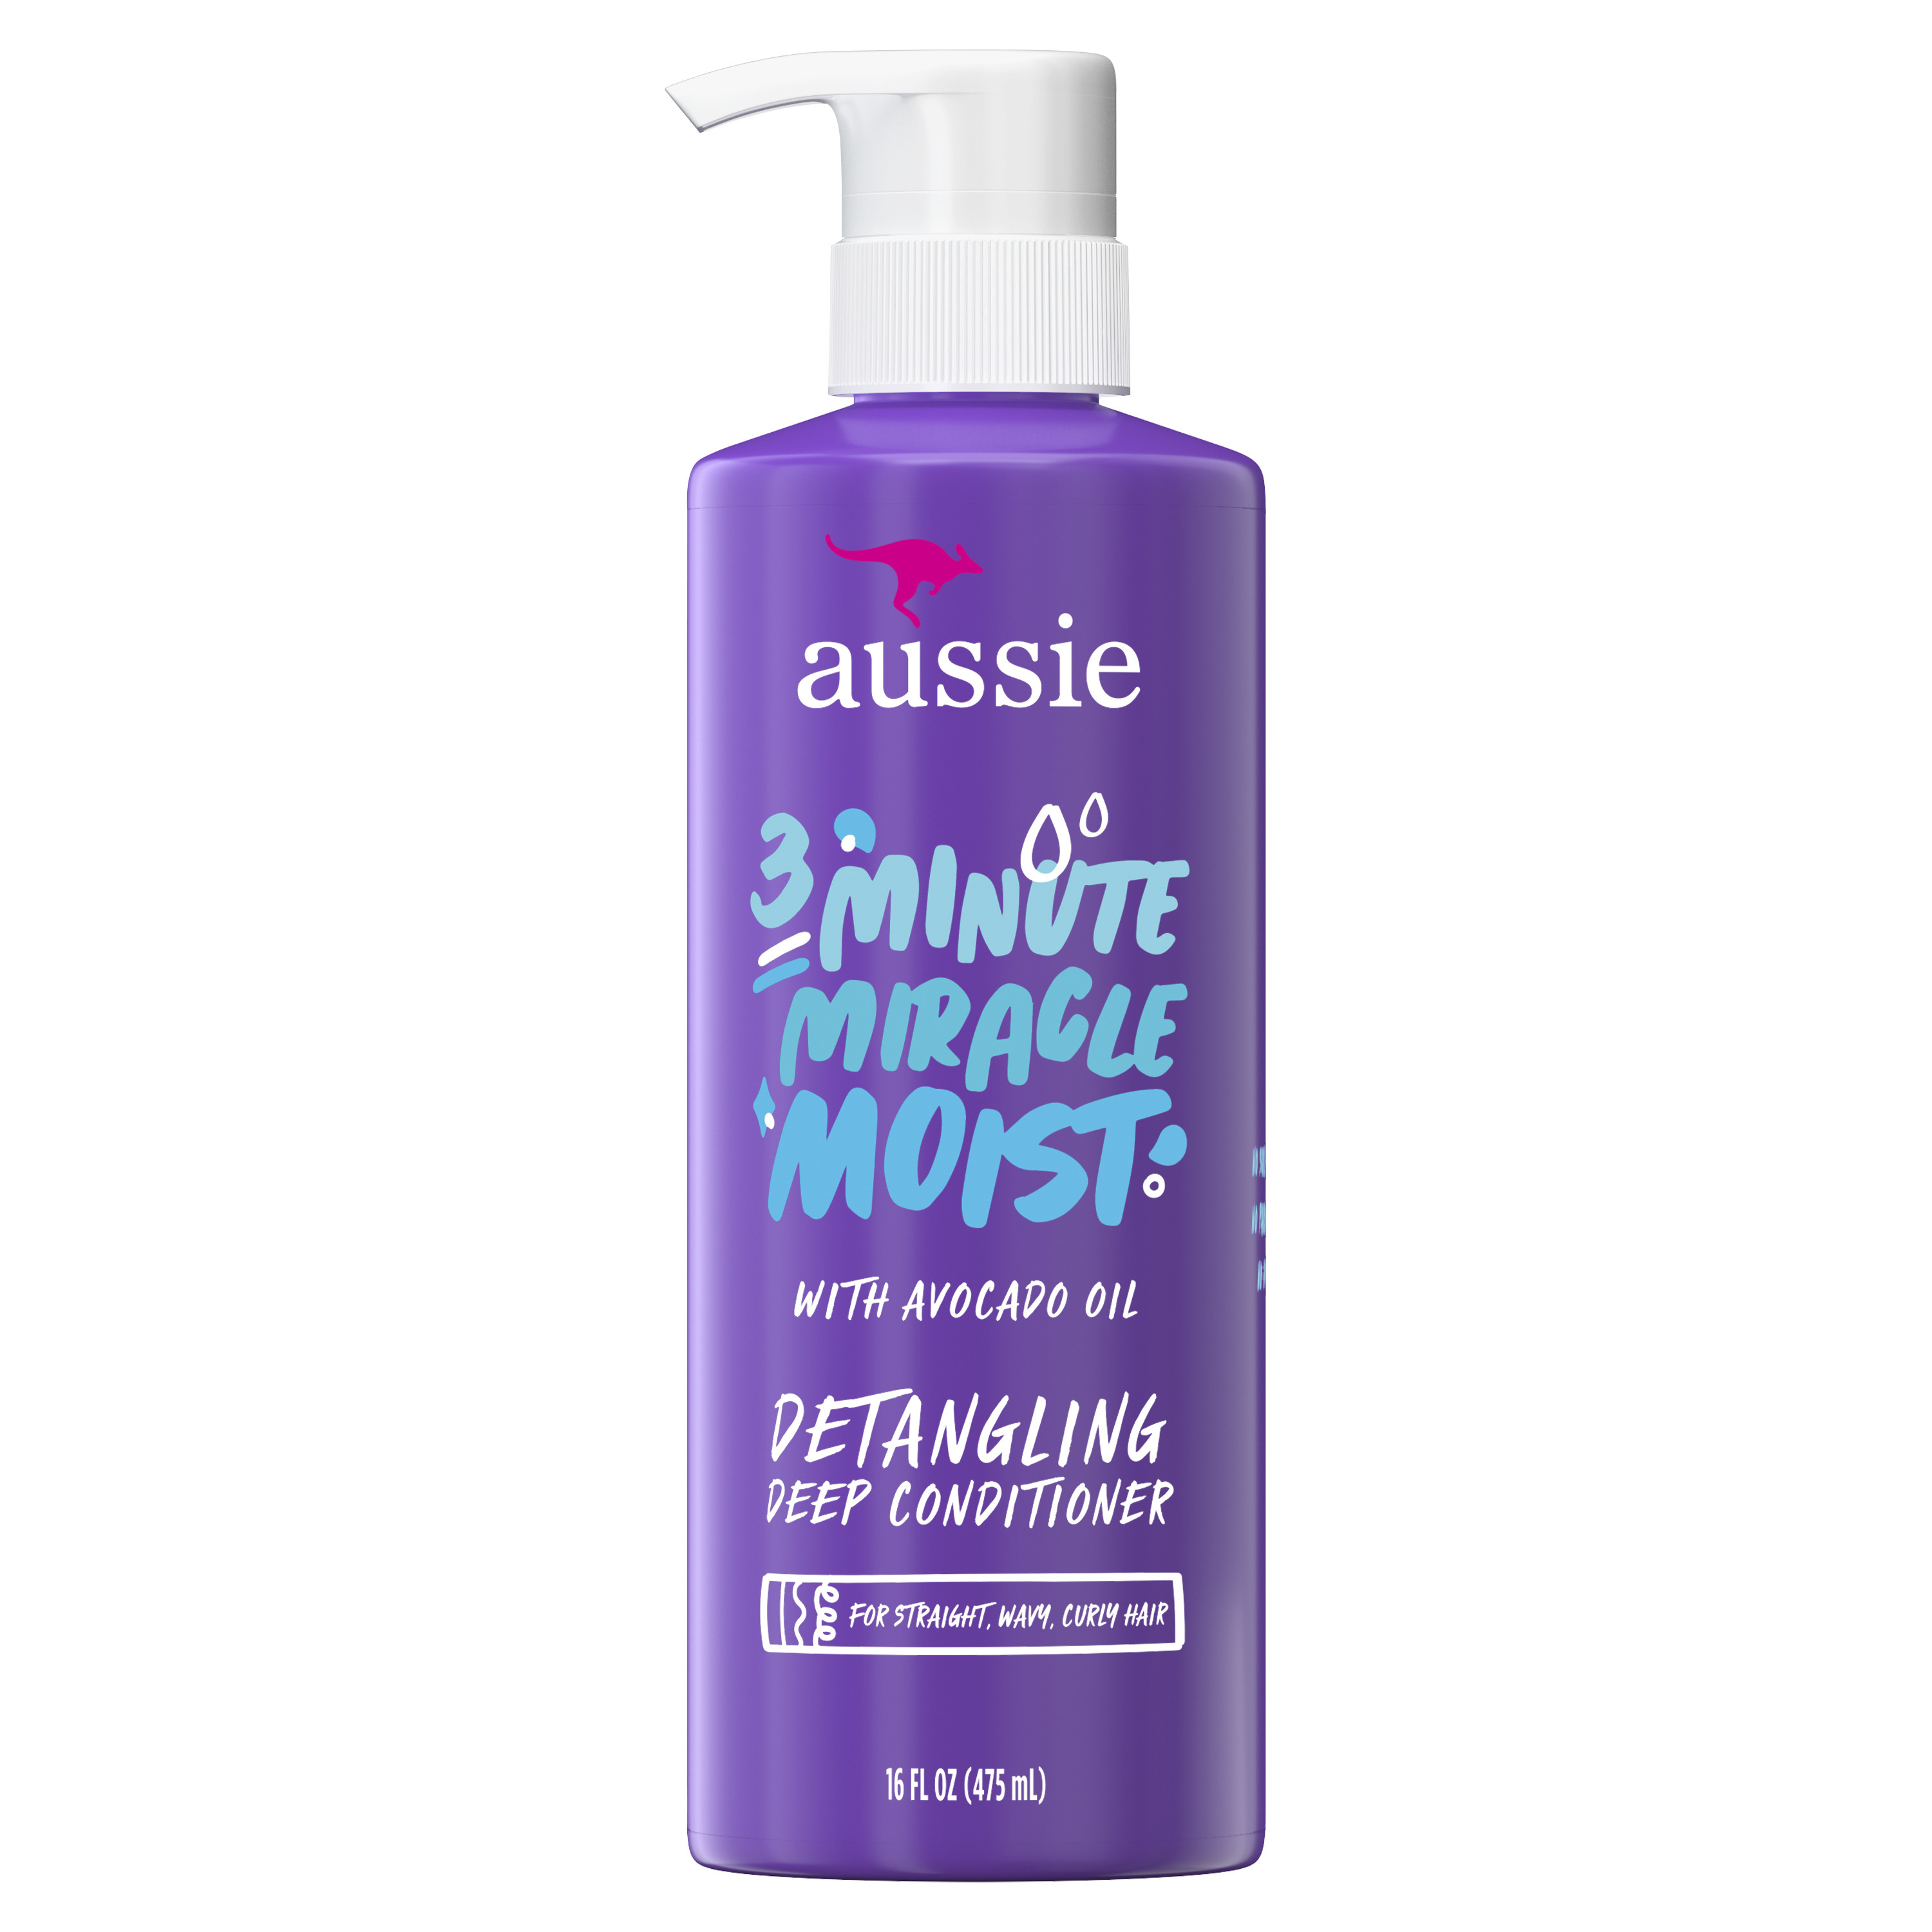 Aussie 3 Minute Miracle Moist Deep Conditioner, Paraben Free, 16 oz - image 2 of 12